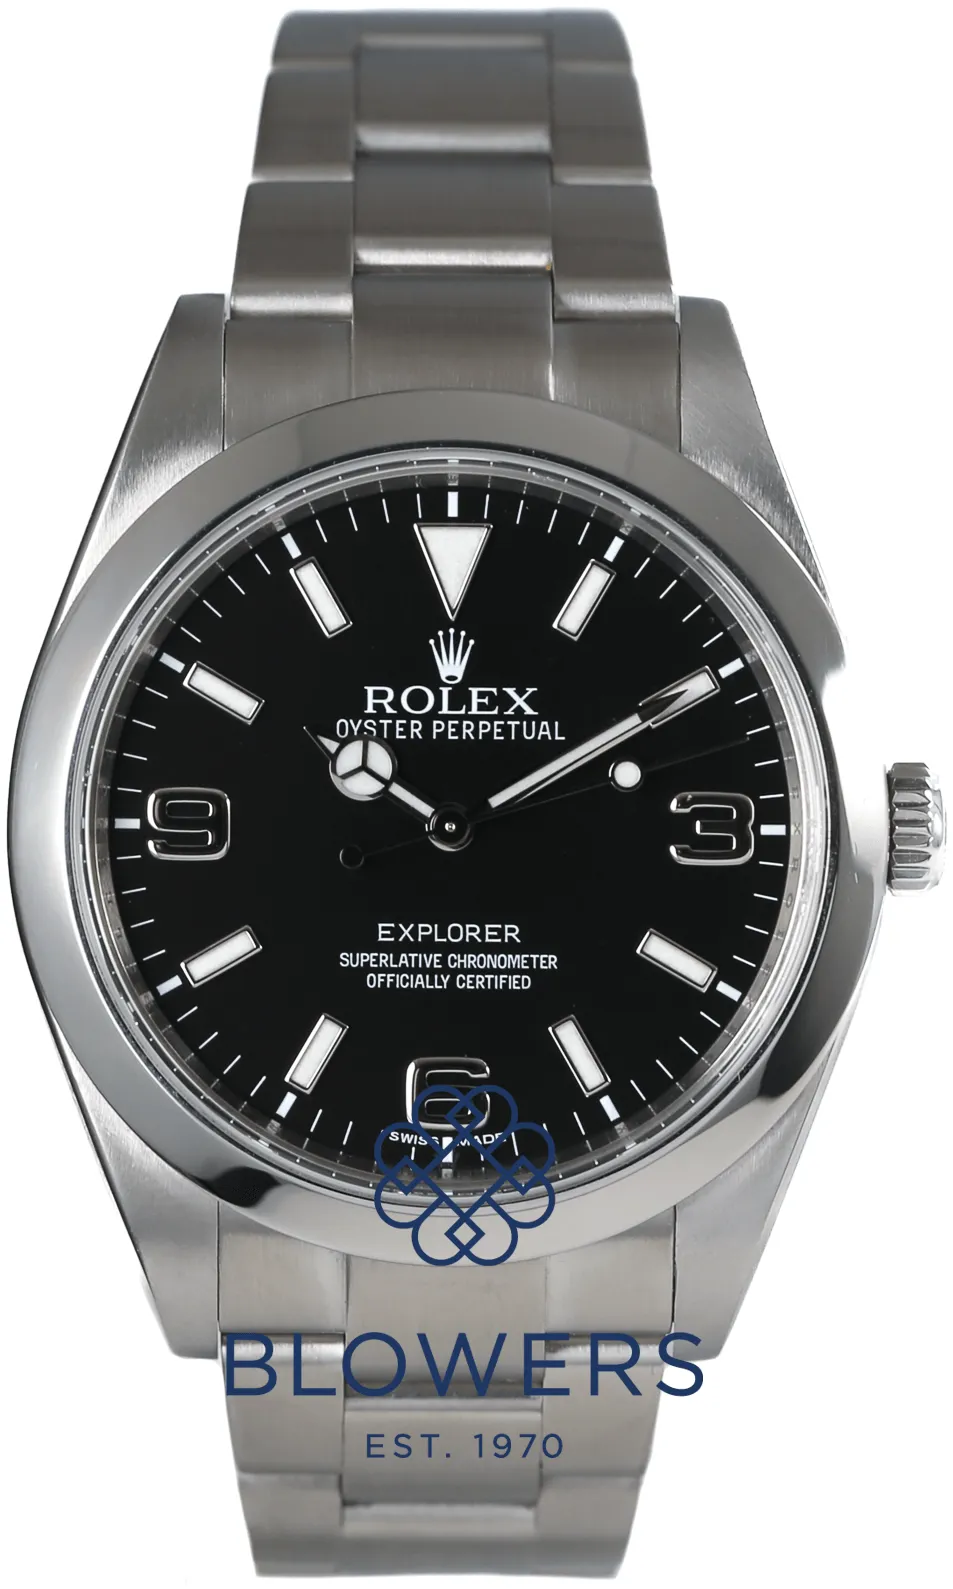 Rolex Oyster Perpetual Explorer 214270 39mm Stainless steel Black